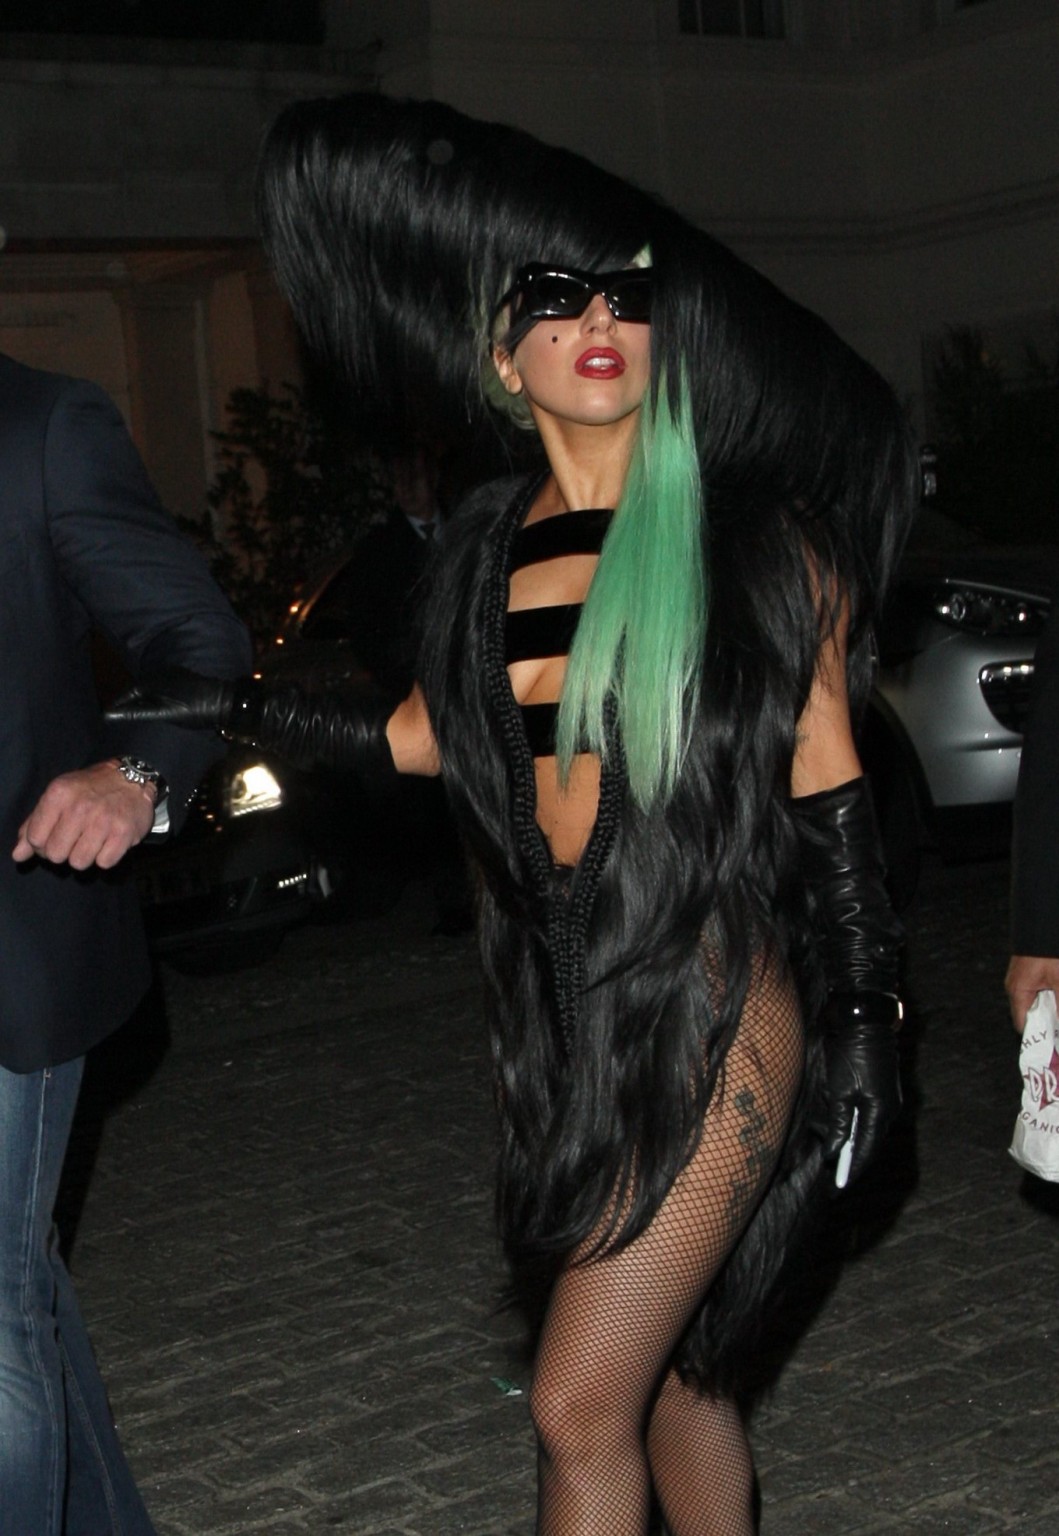 Lady Gaga sighting in London wearing skimpy outfit #75286134